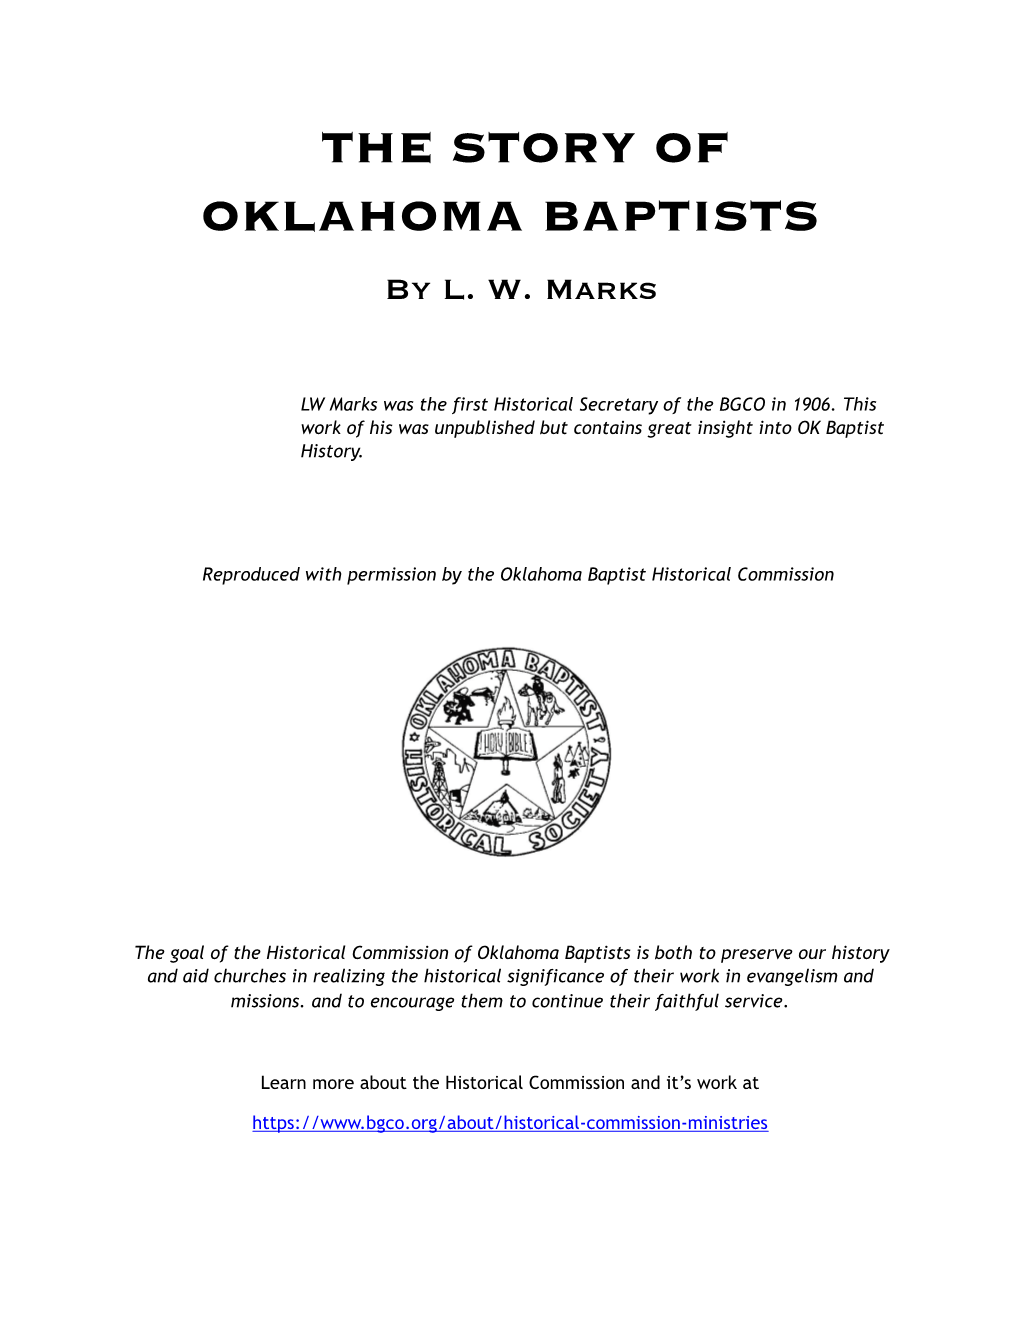 Story of OK Baptists by LW Marks